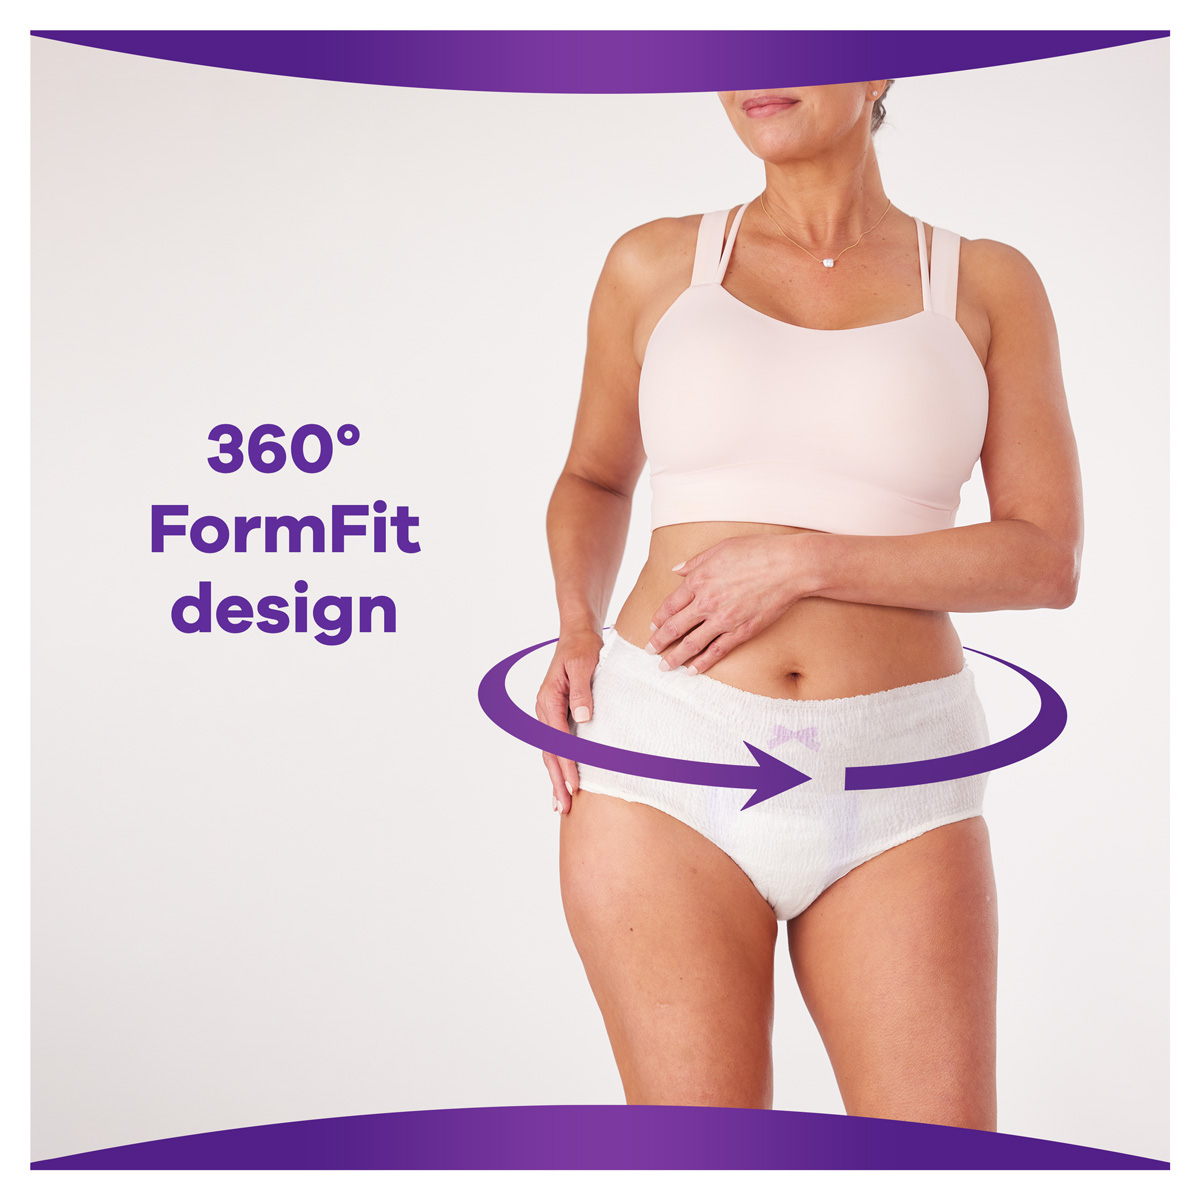 DELISTED) Always Discreet Incontinence Pants Normal L - 10